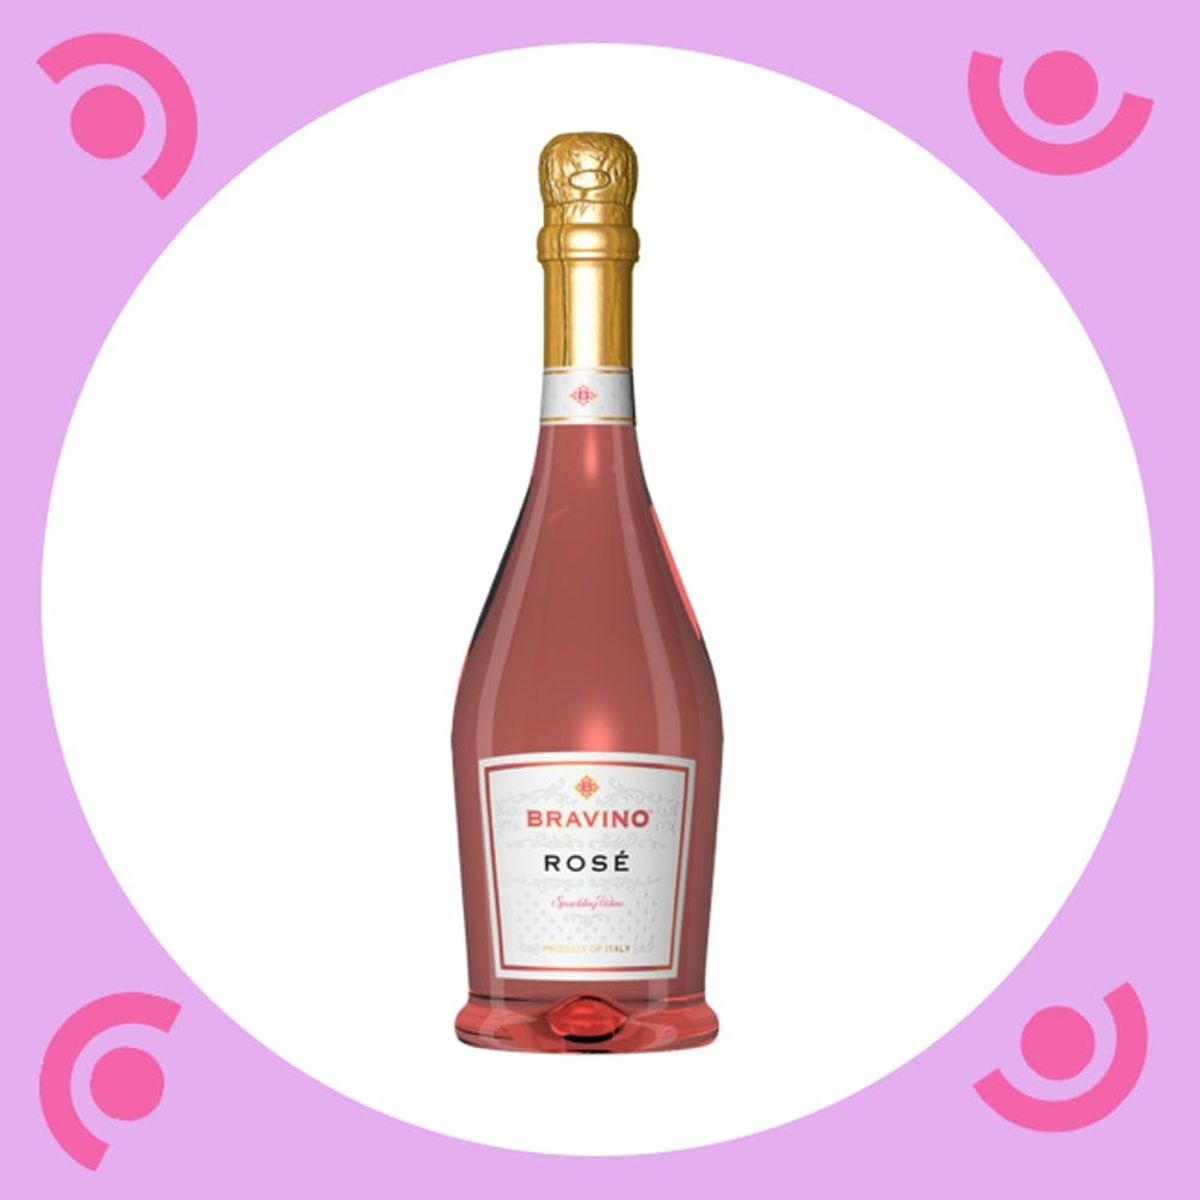 Drop Everything: Target Now Sells $10 Bottles of Prosecco and Rosé